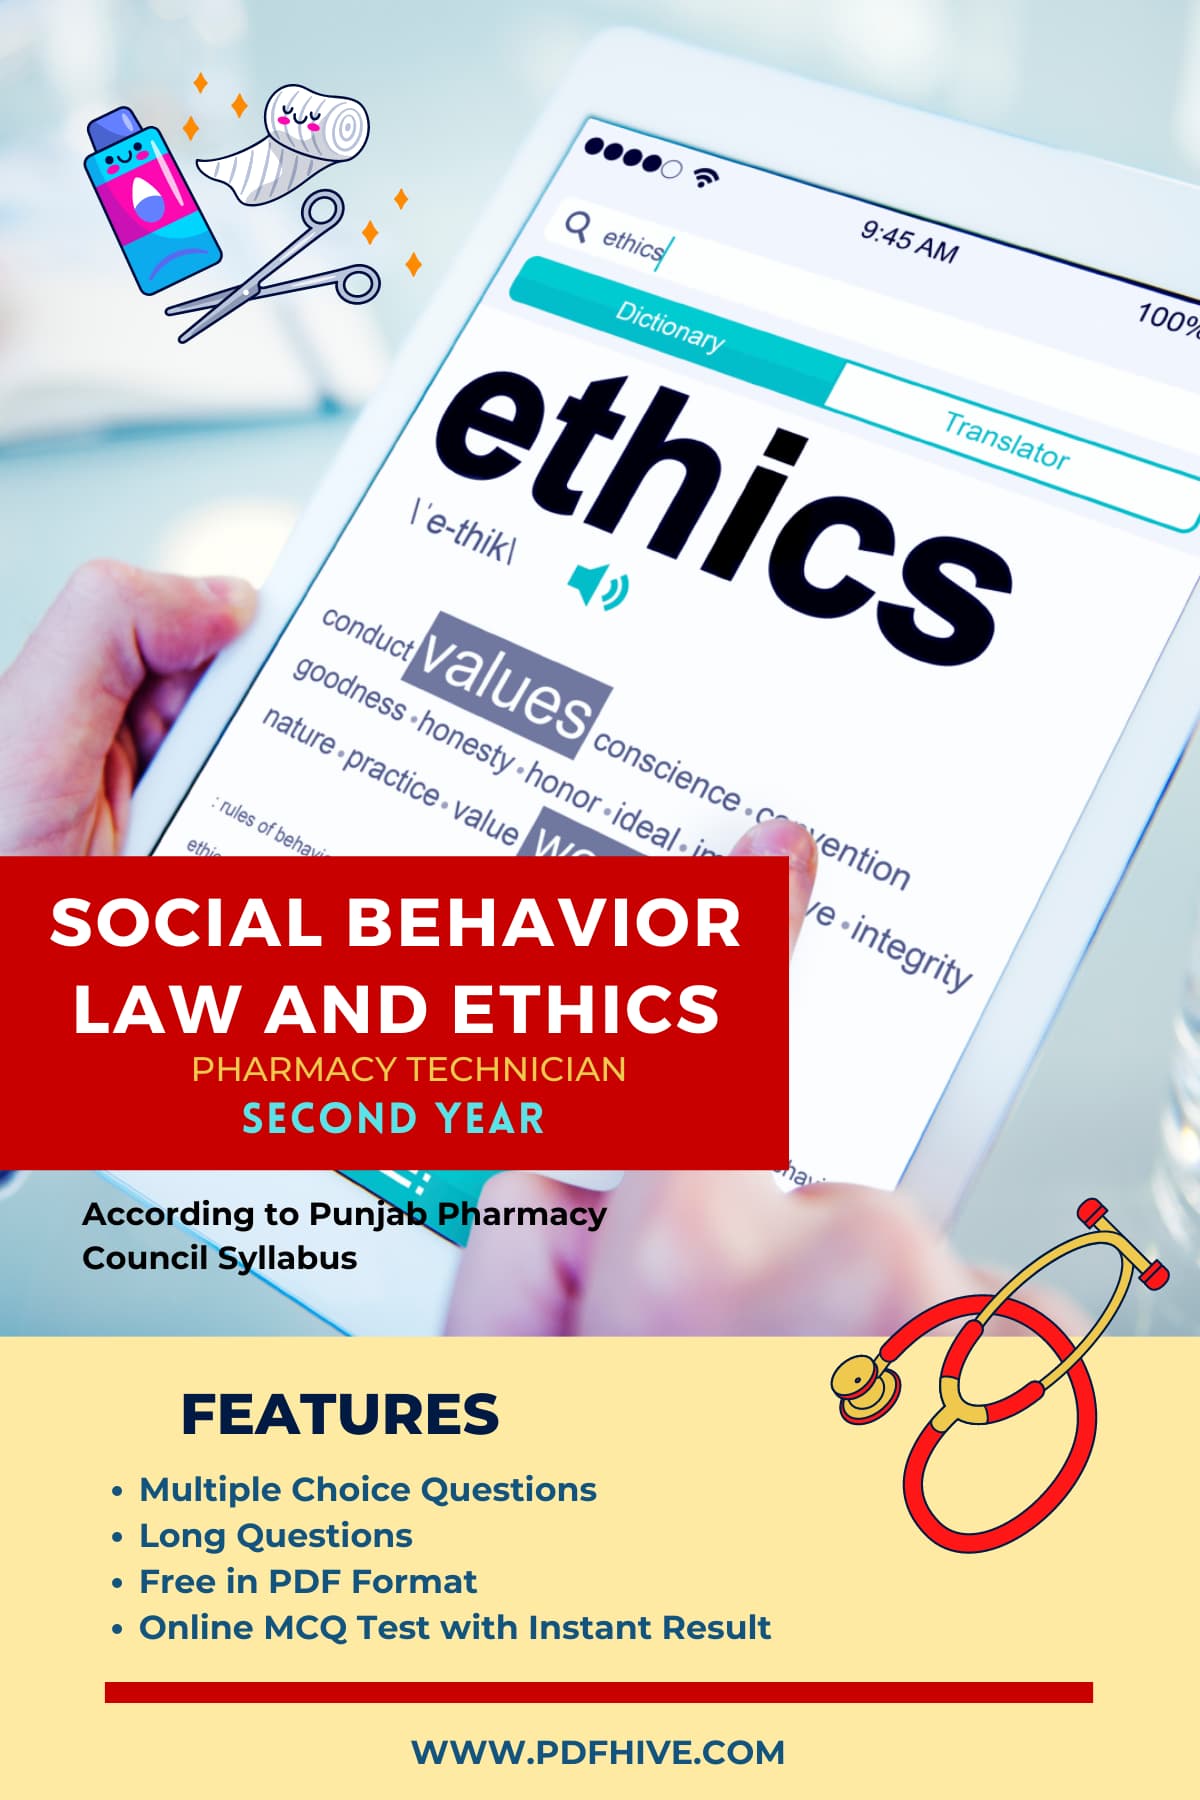 Social Behavior Law and Ethics (Pharmacy Technician) Download Free PDF